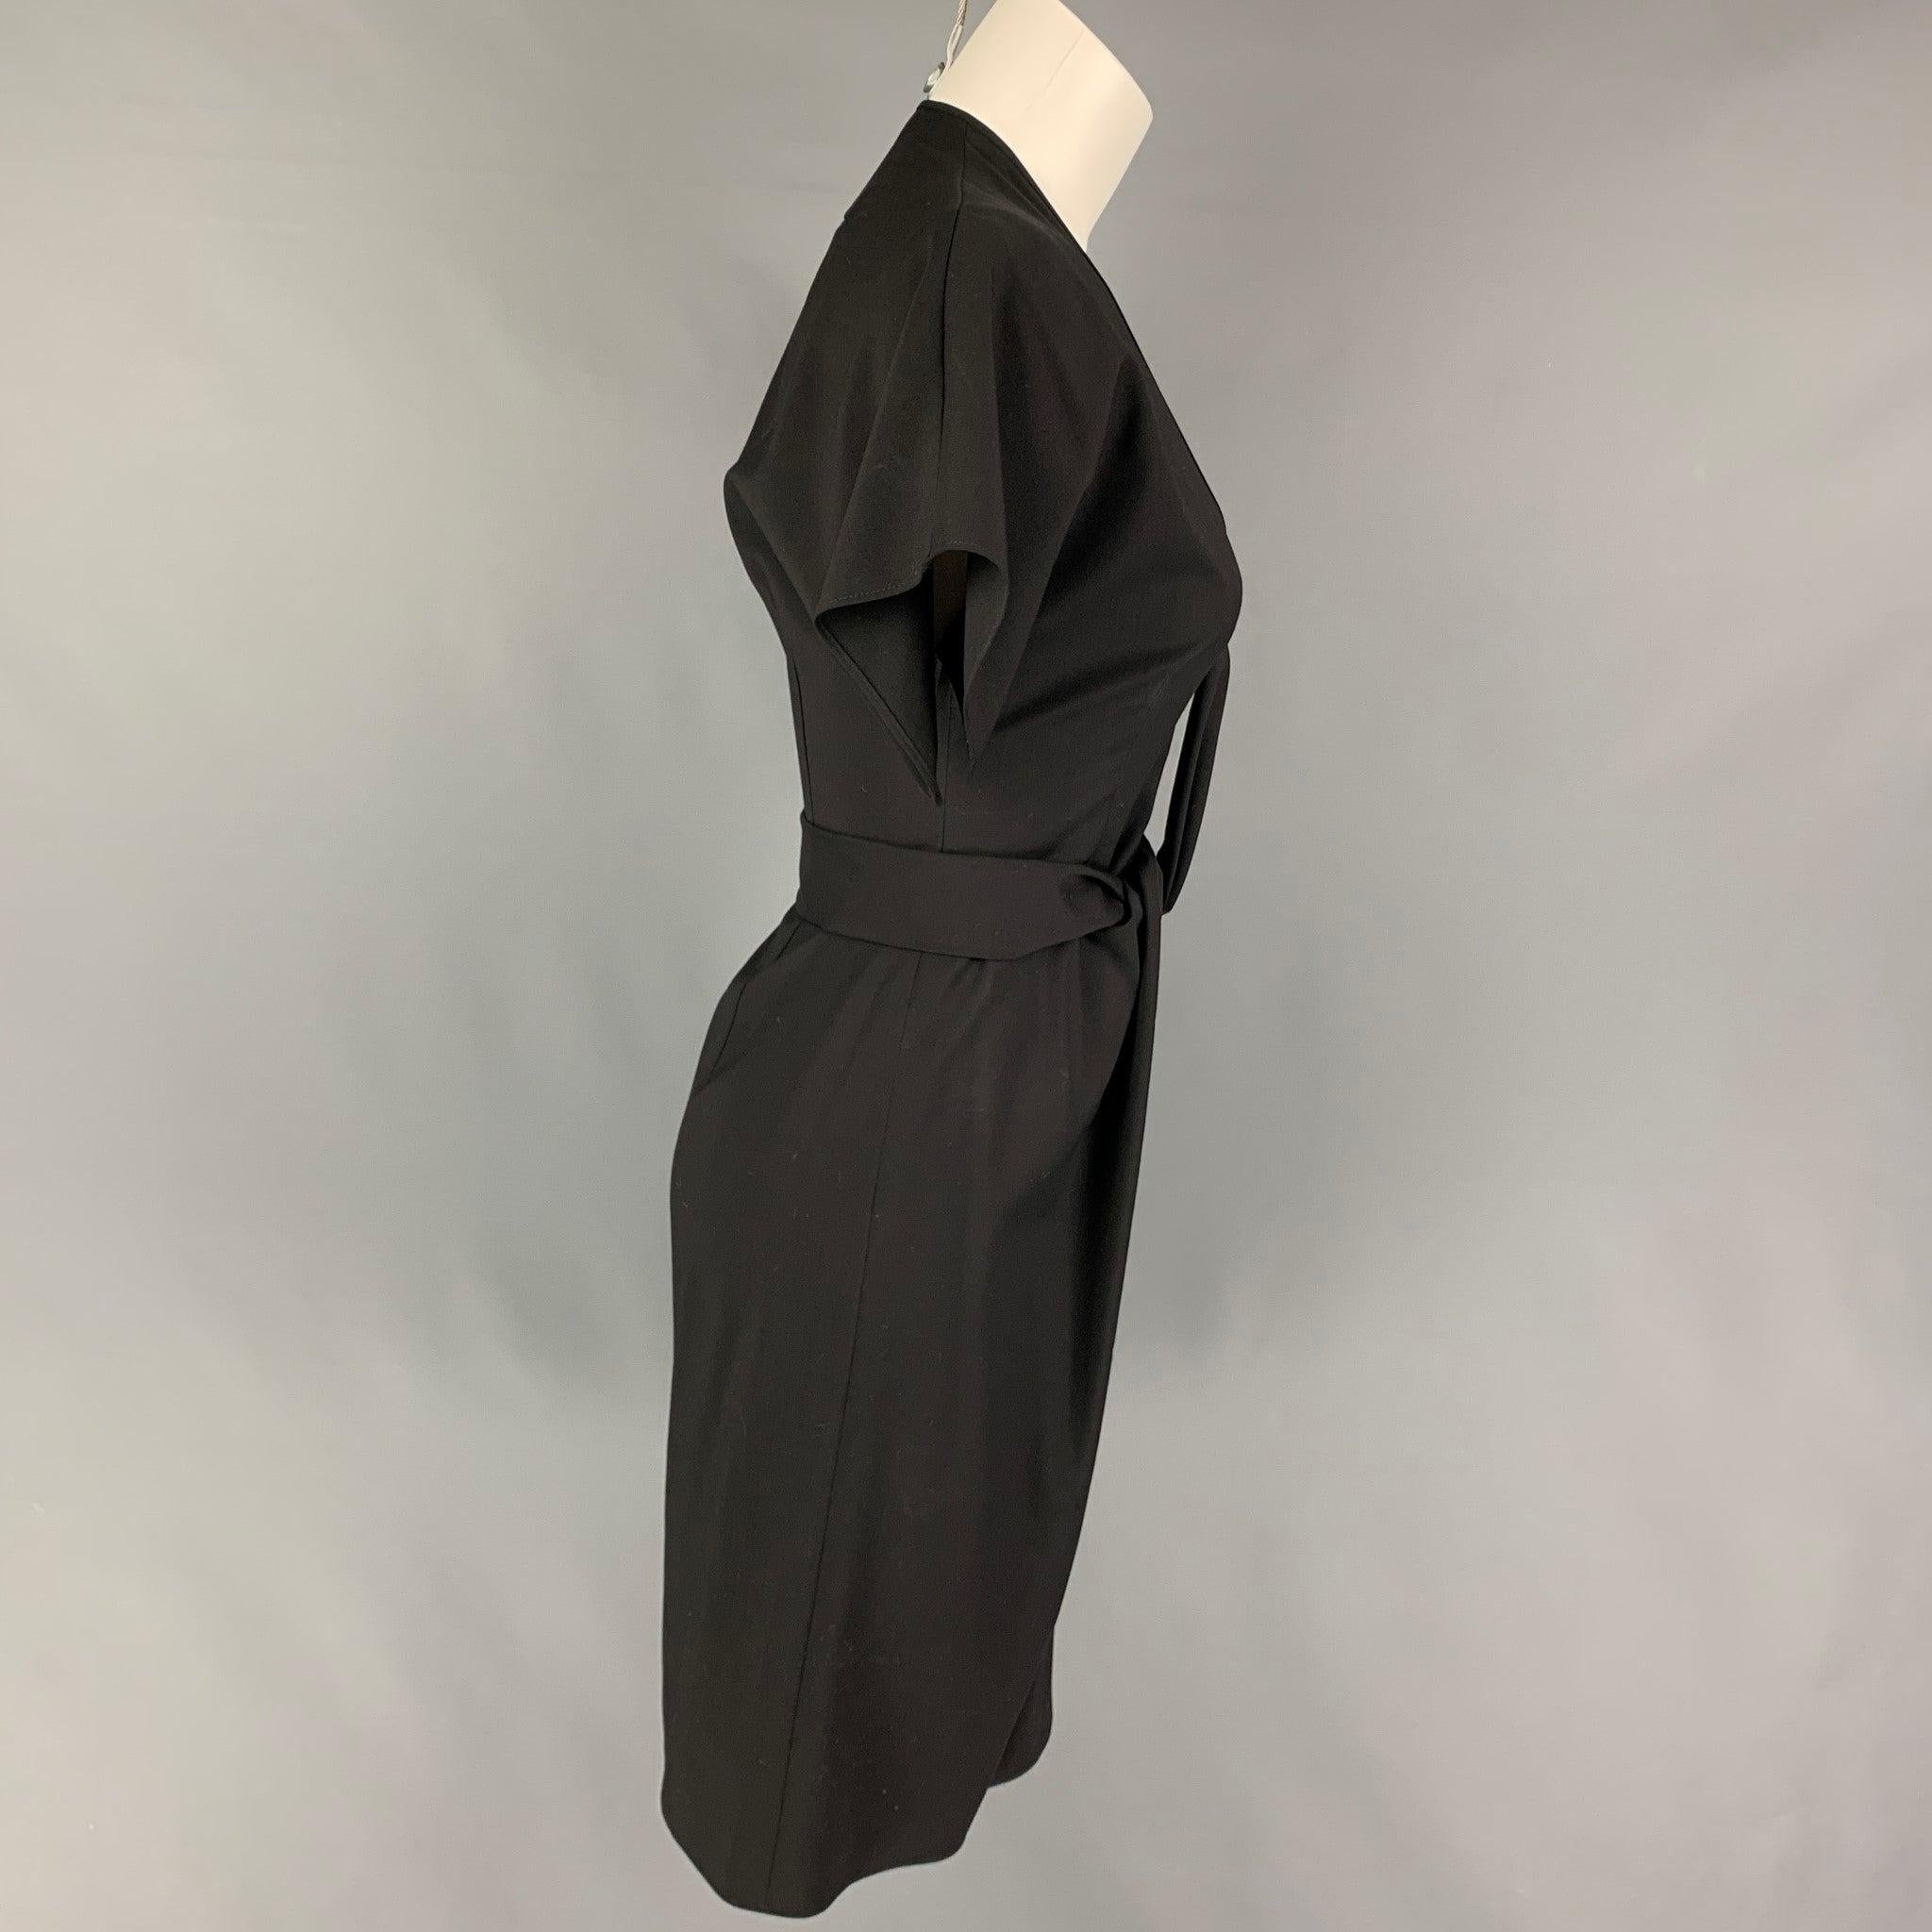 GIVENCHY dress comes in a black virgin wool featuring a v-neck, front ruched design, short sleeves, and a side zipper closure. Made in Italy.
Very Good
Pre-Owned Condition. 

Marked:   38 

Measurements: 
 
Shoulder: 16 inches  Bust: 32 inches 